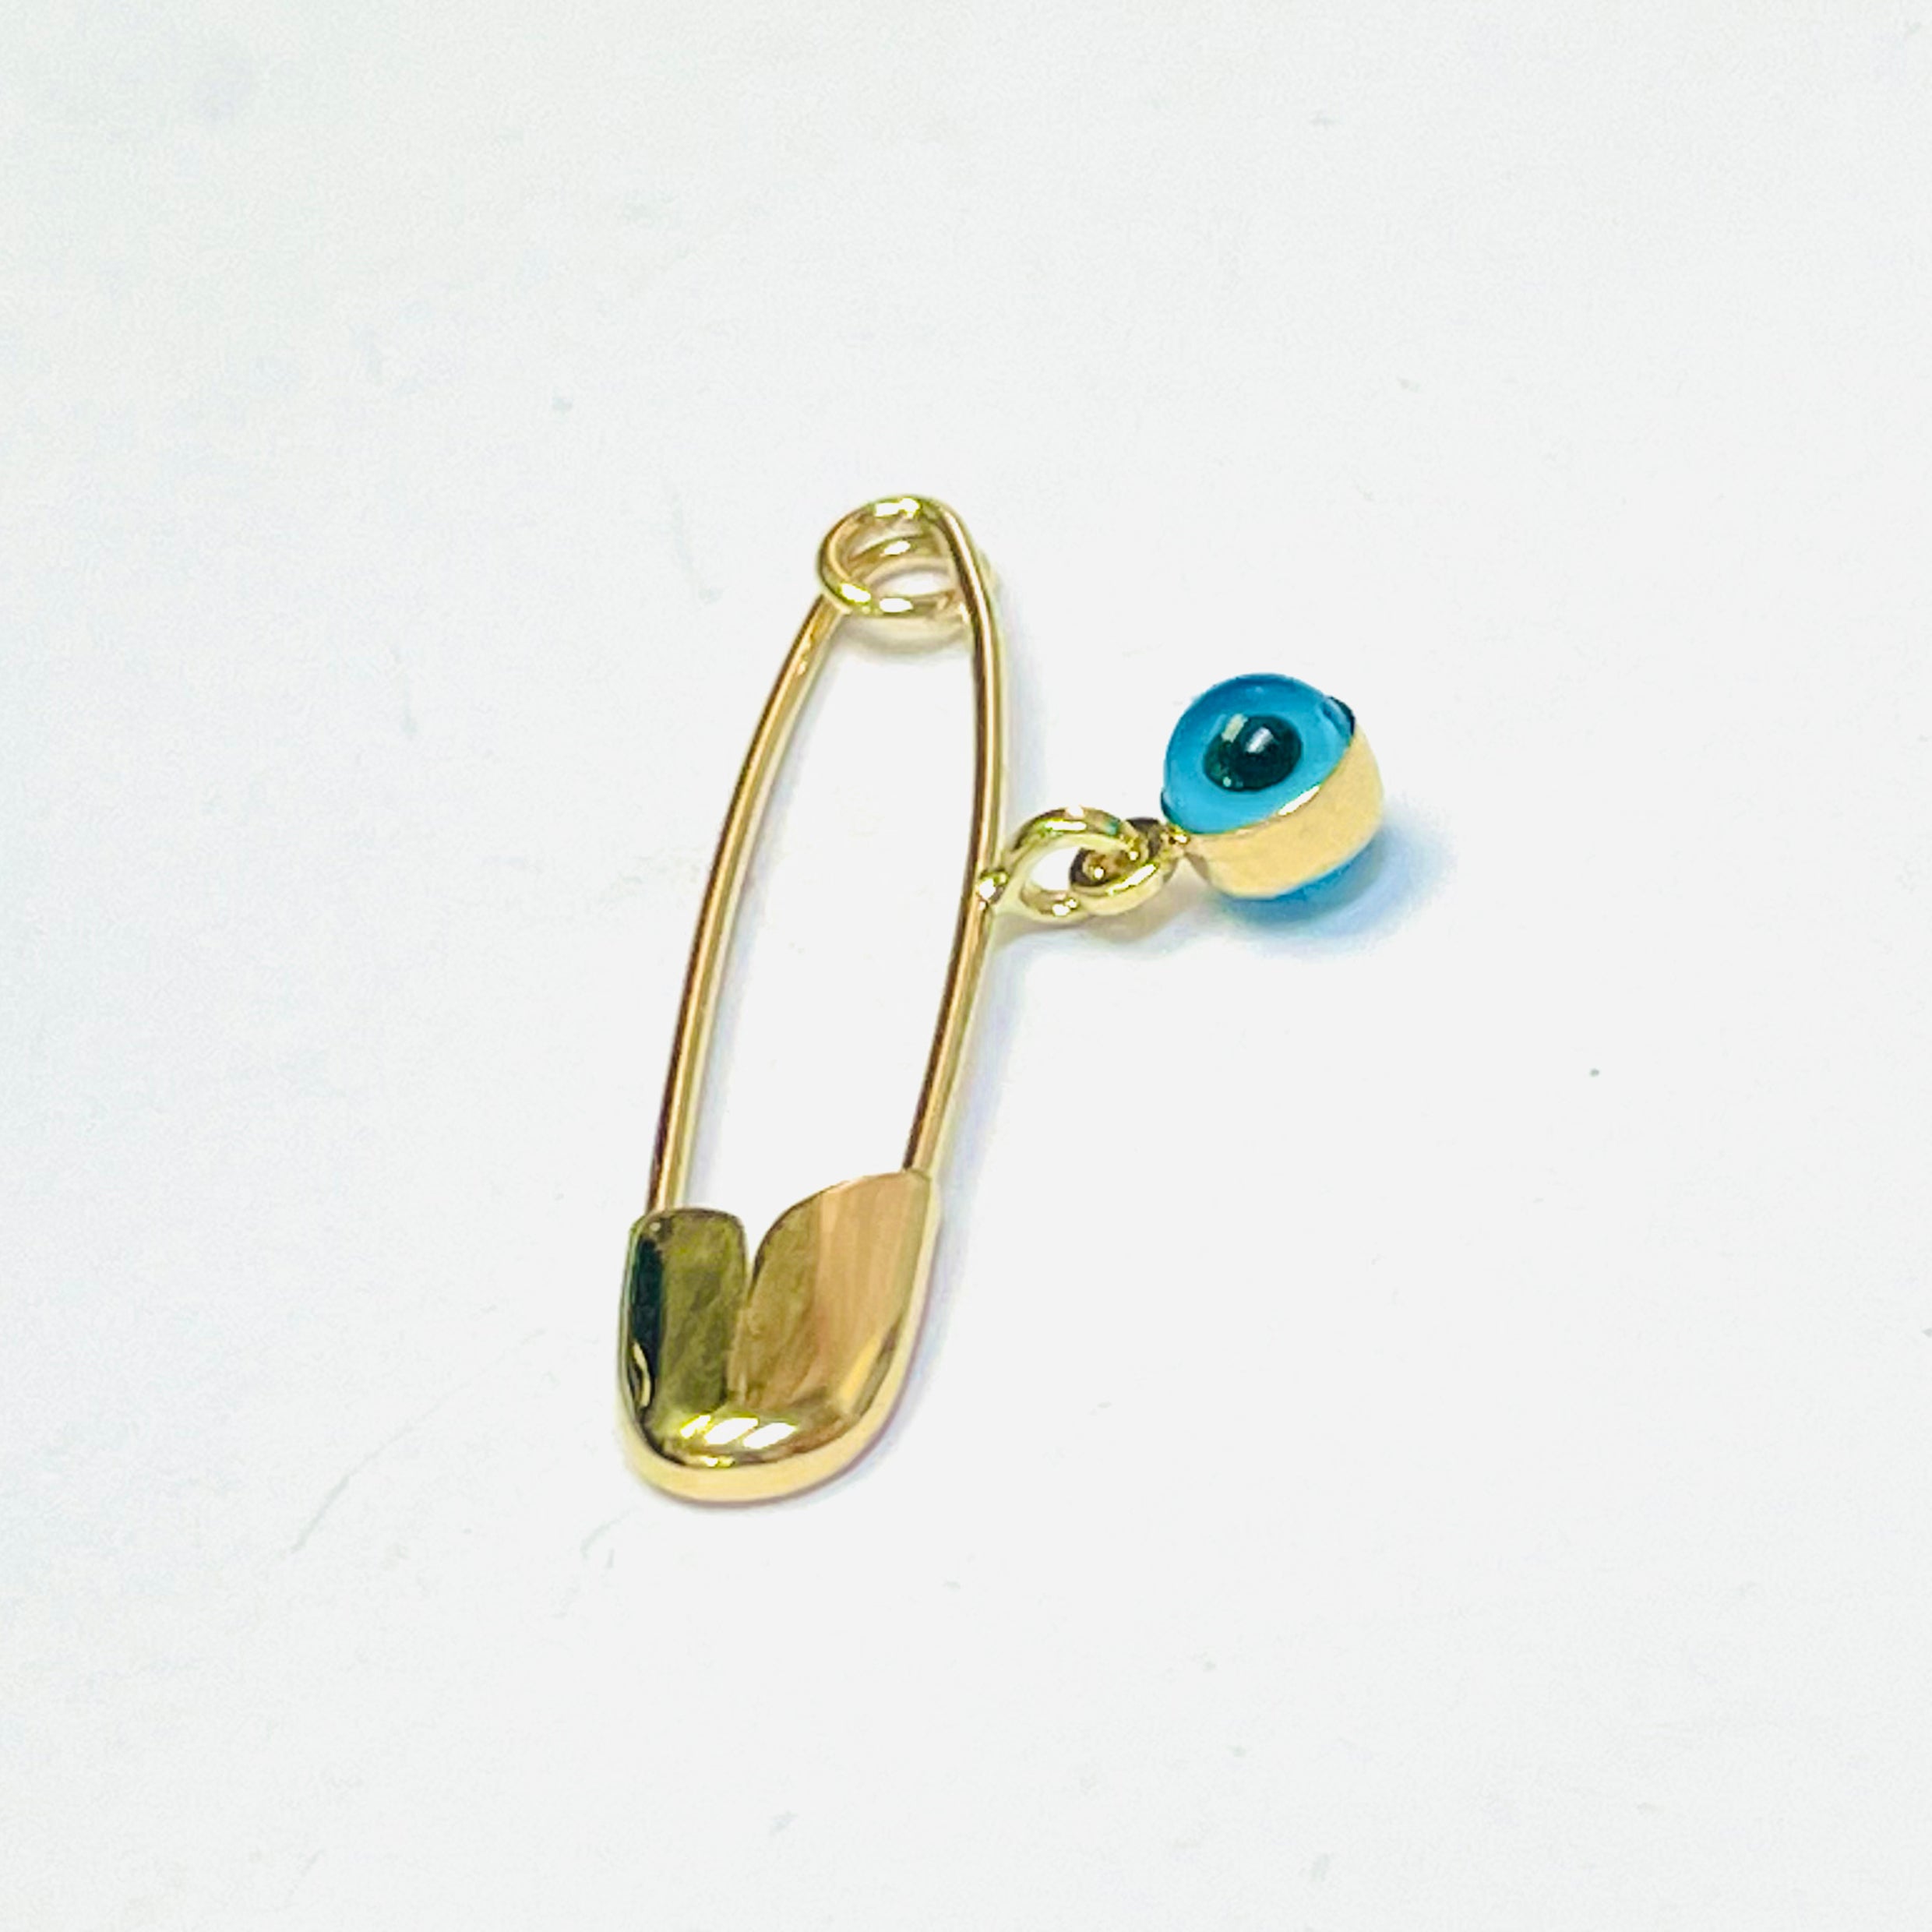 14K Solid Yellow Gold Safety Pin Pendant Charm Holder With Evil Eye 1"